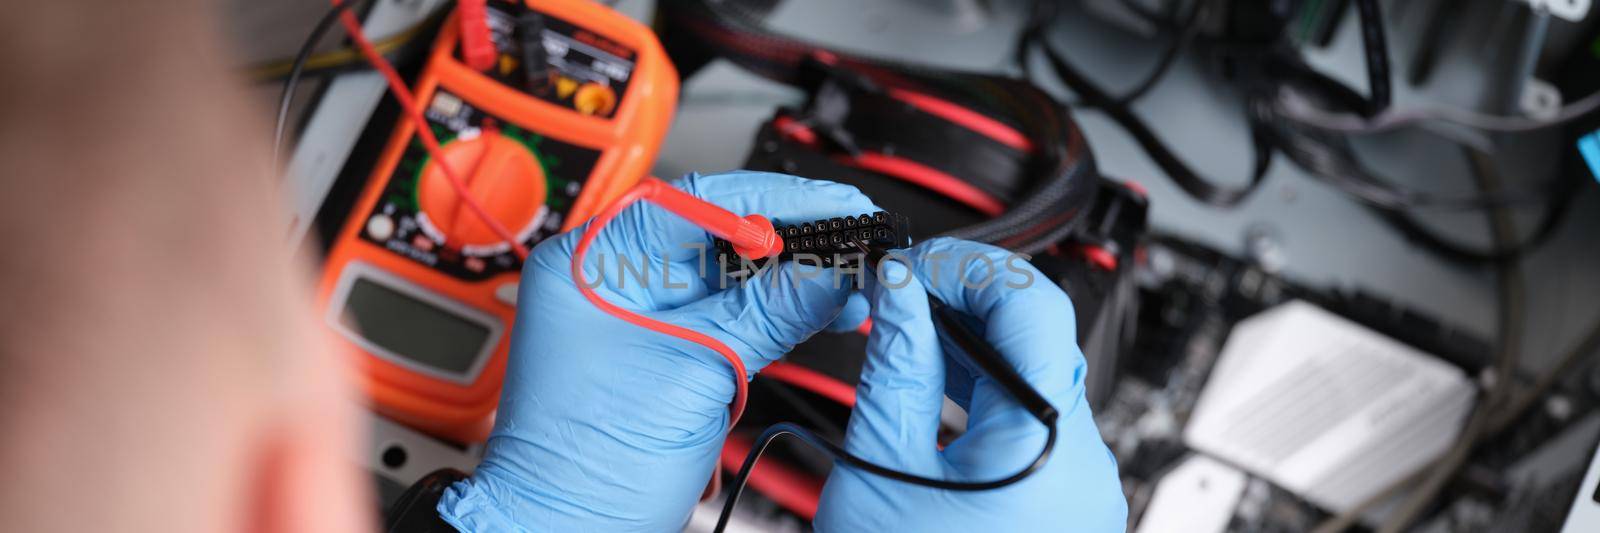 Man working with a multimeter to repair computers, close-up. Digital device, voltage measurement, upgrade pc